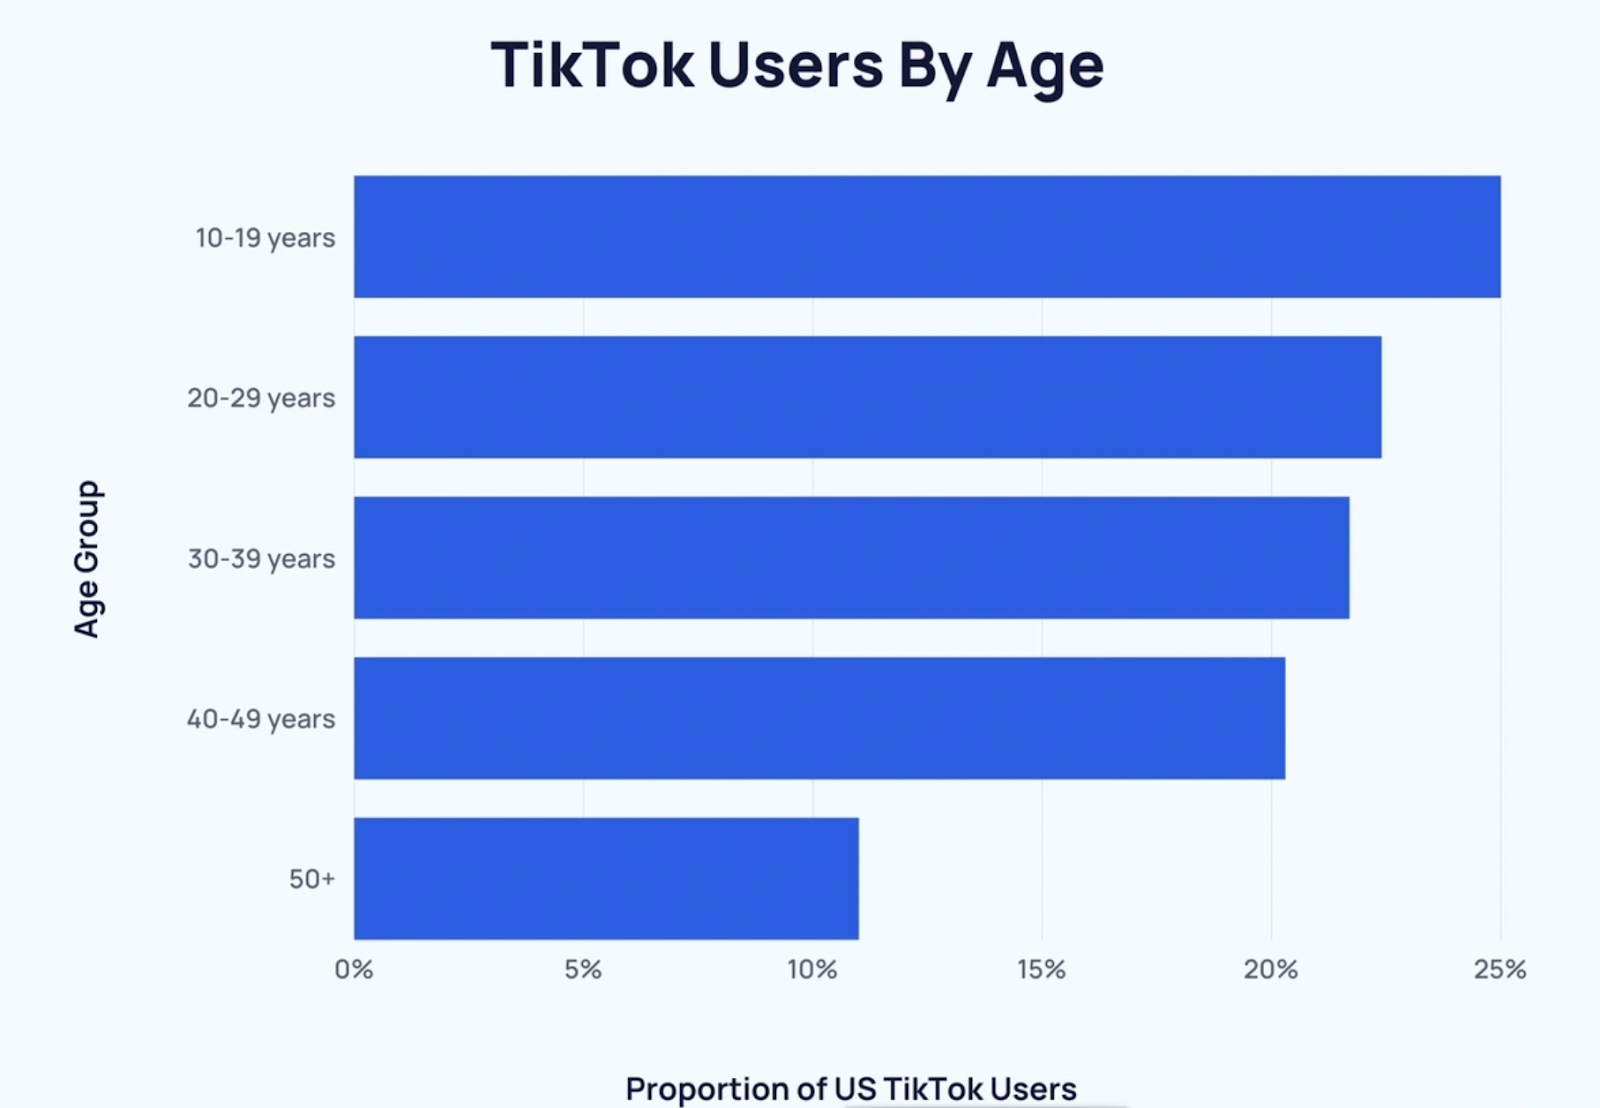 How to Reach a Wider Audience on TikTok